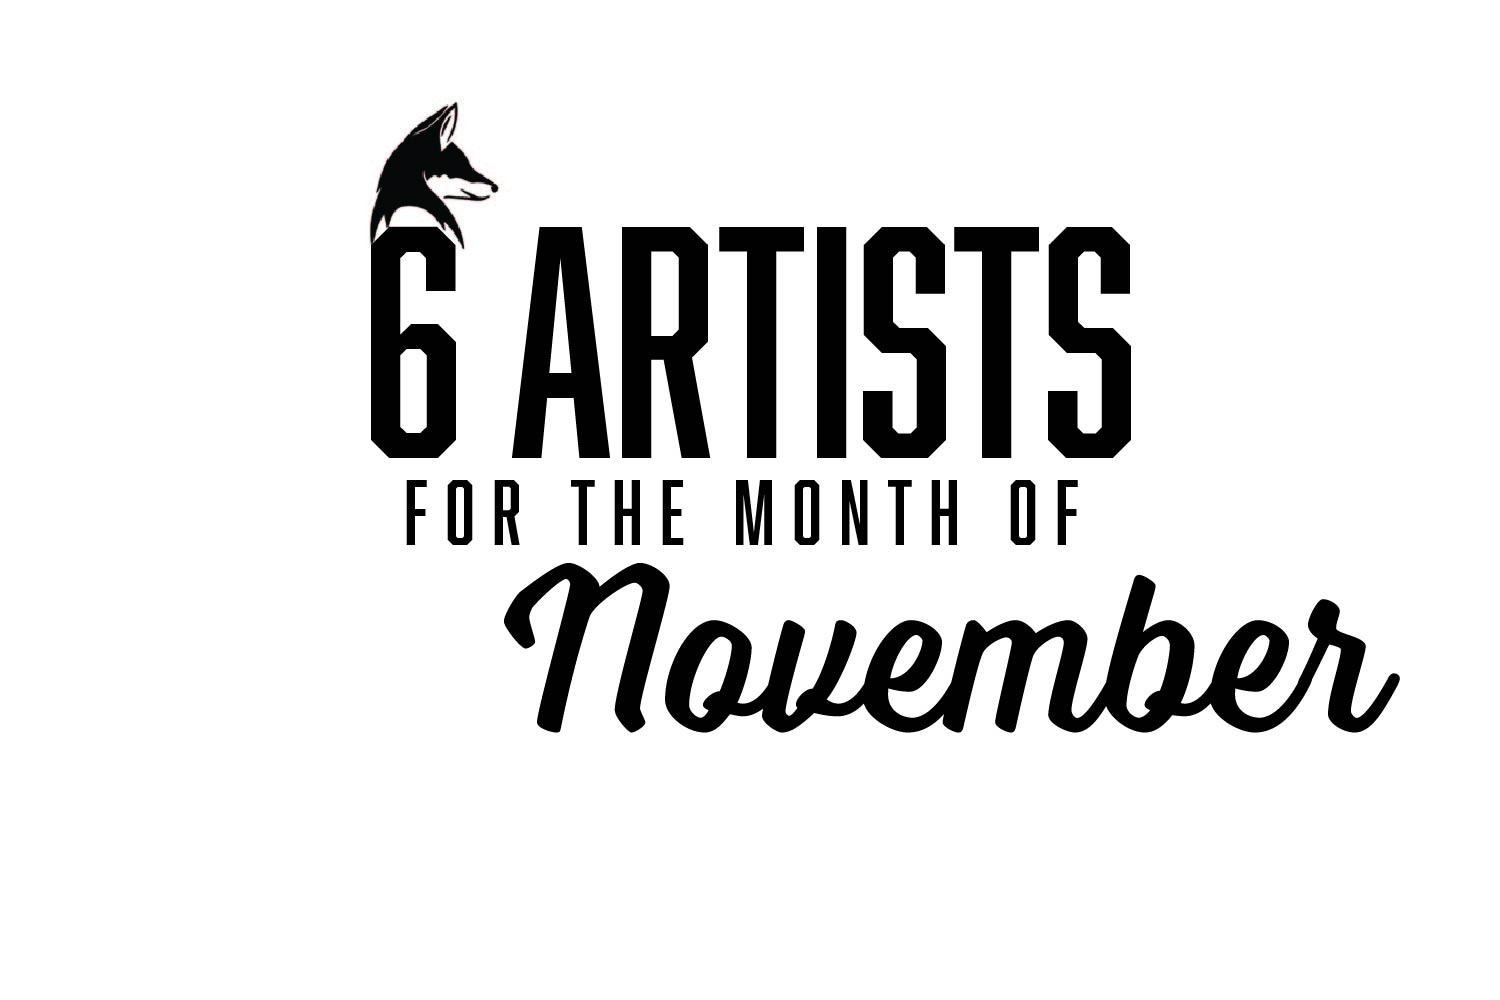 Six Artists You Should be Listening to: November 2021 Edition